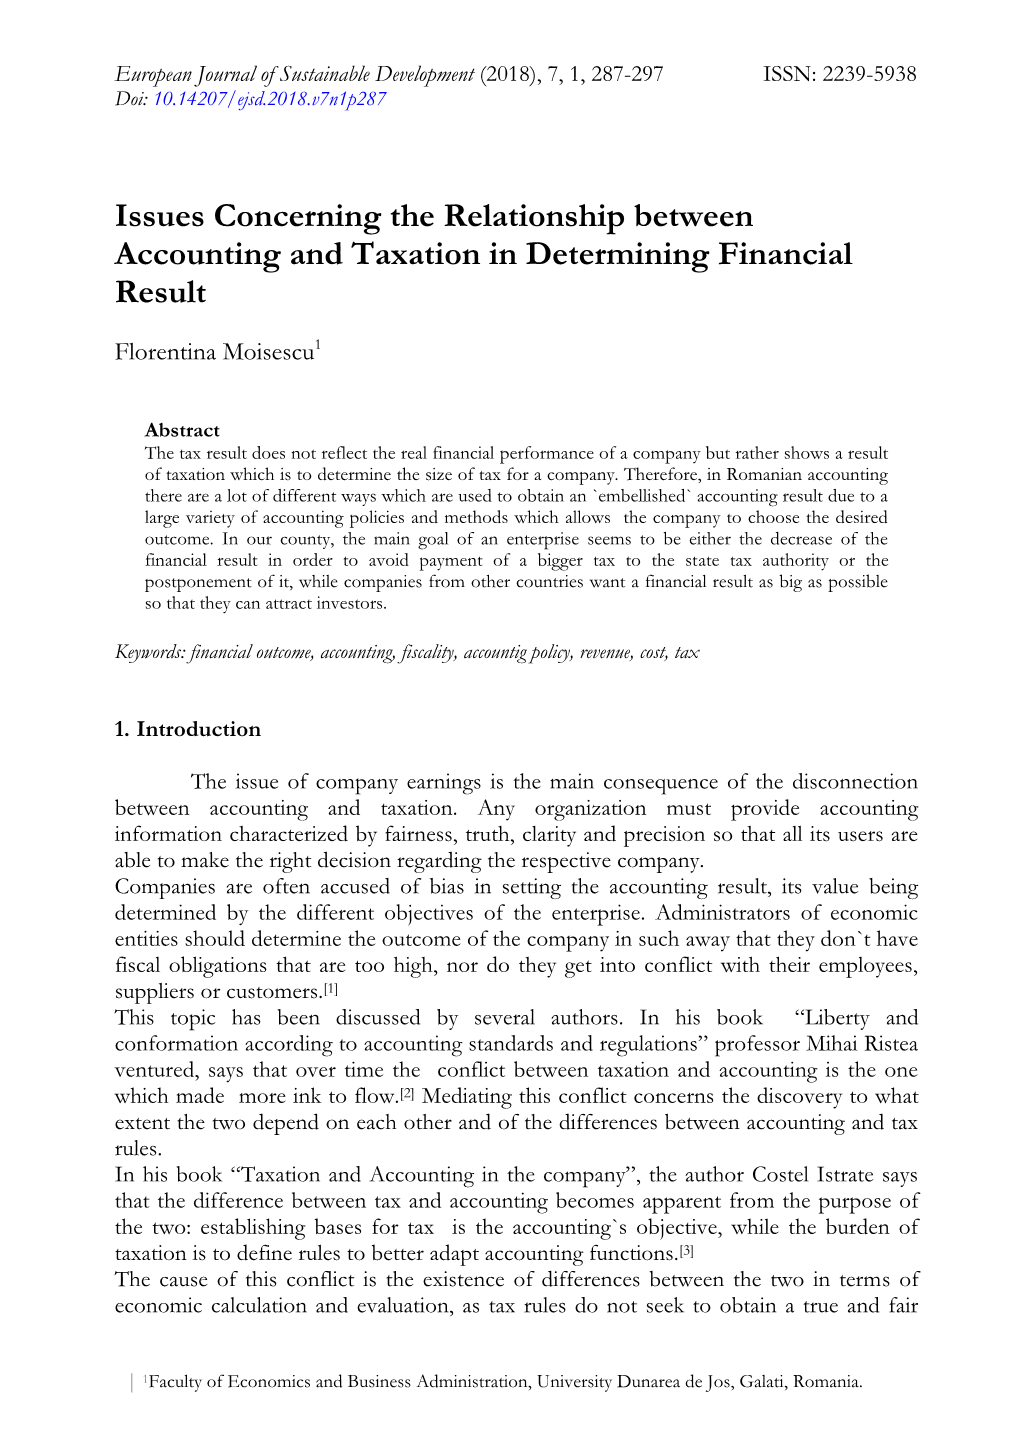 Issues Concerning the Relationship Between Accounting and Taxation in Determining Financial Result